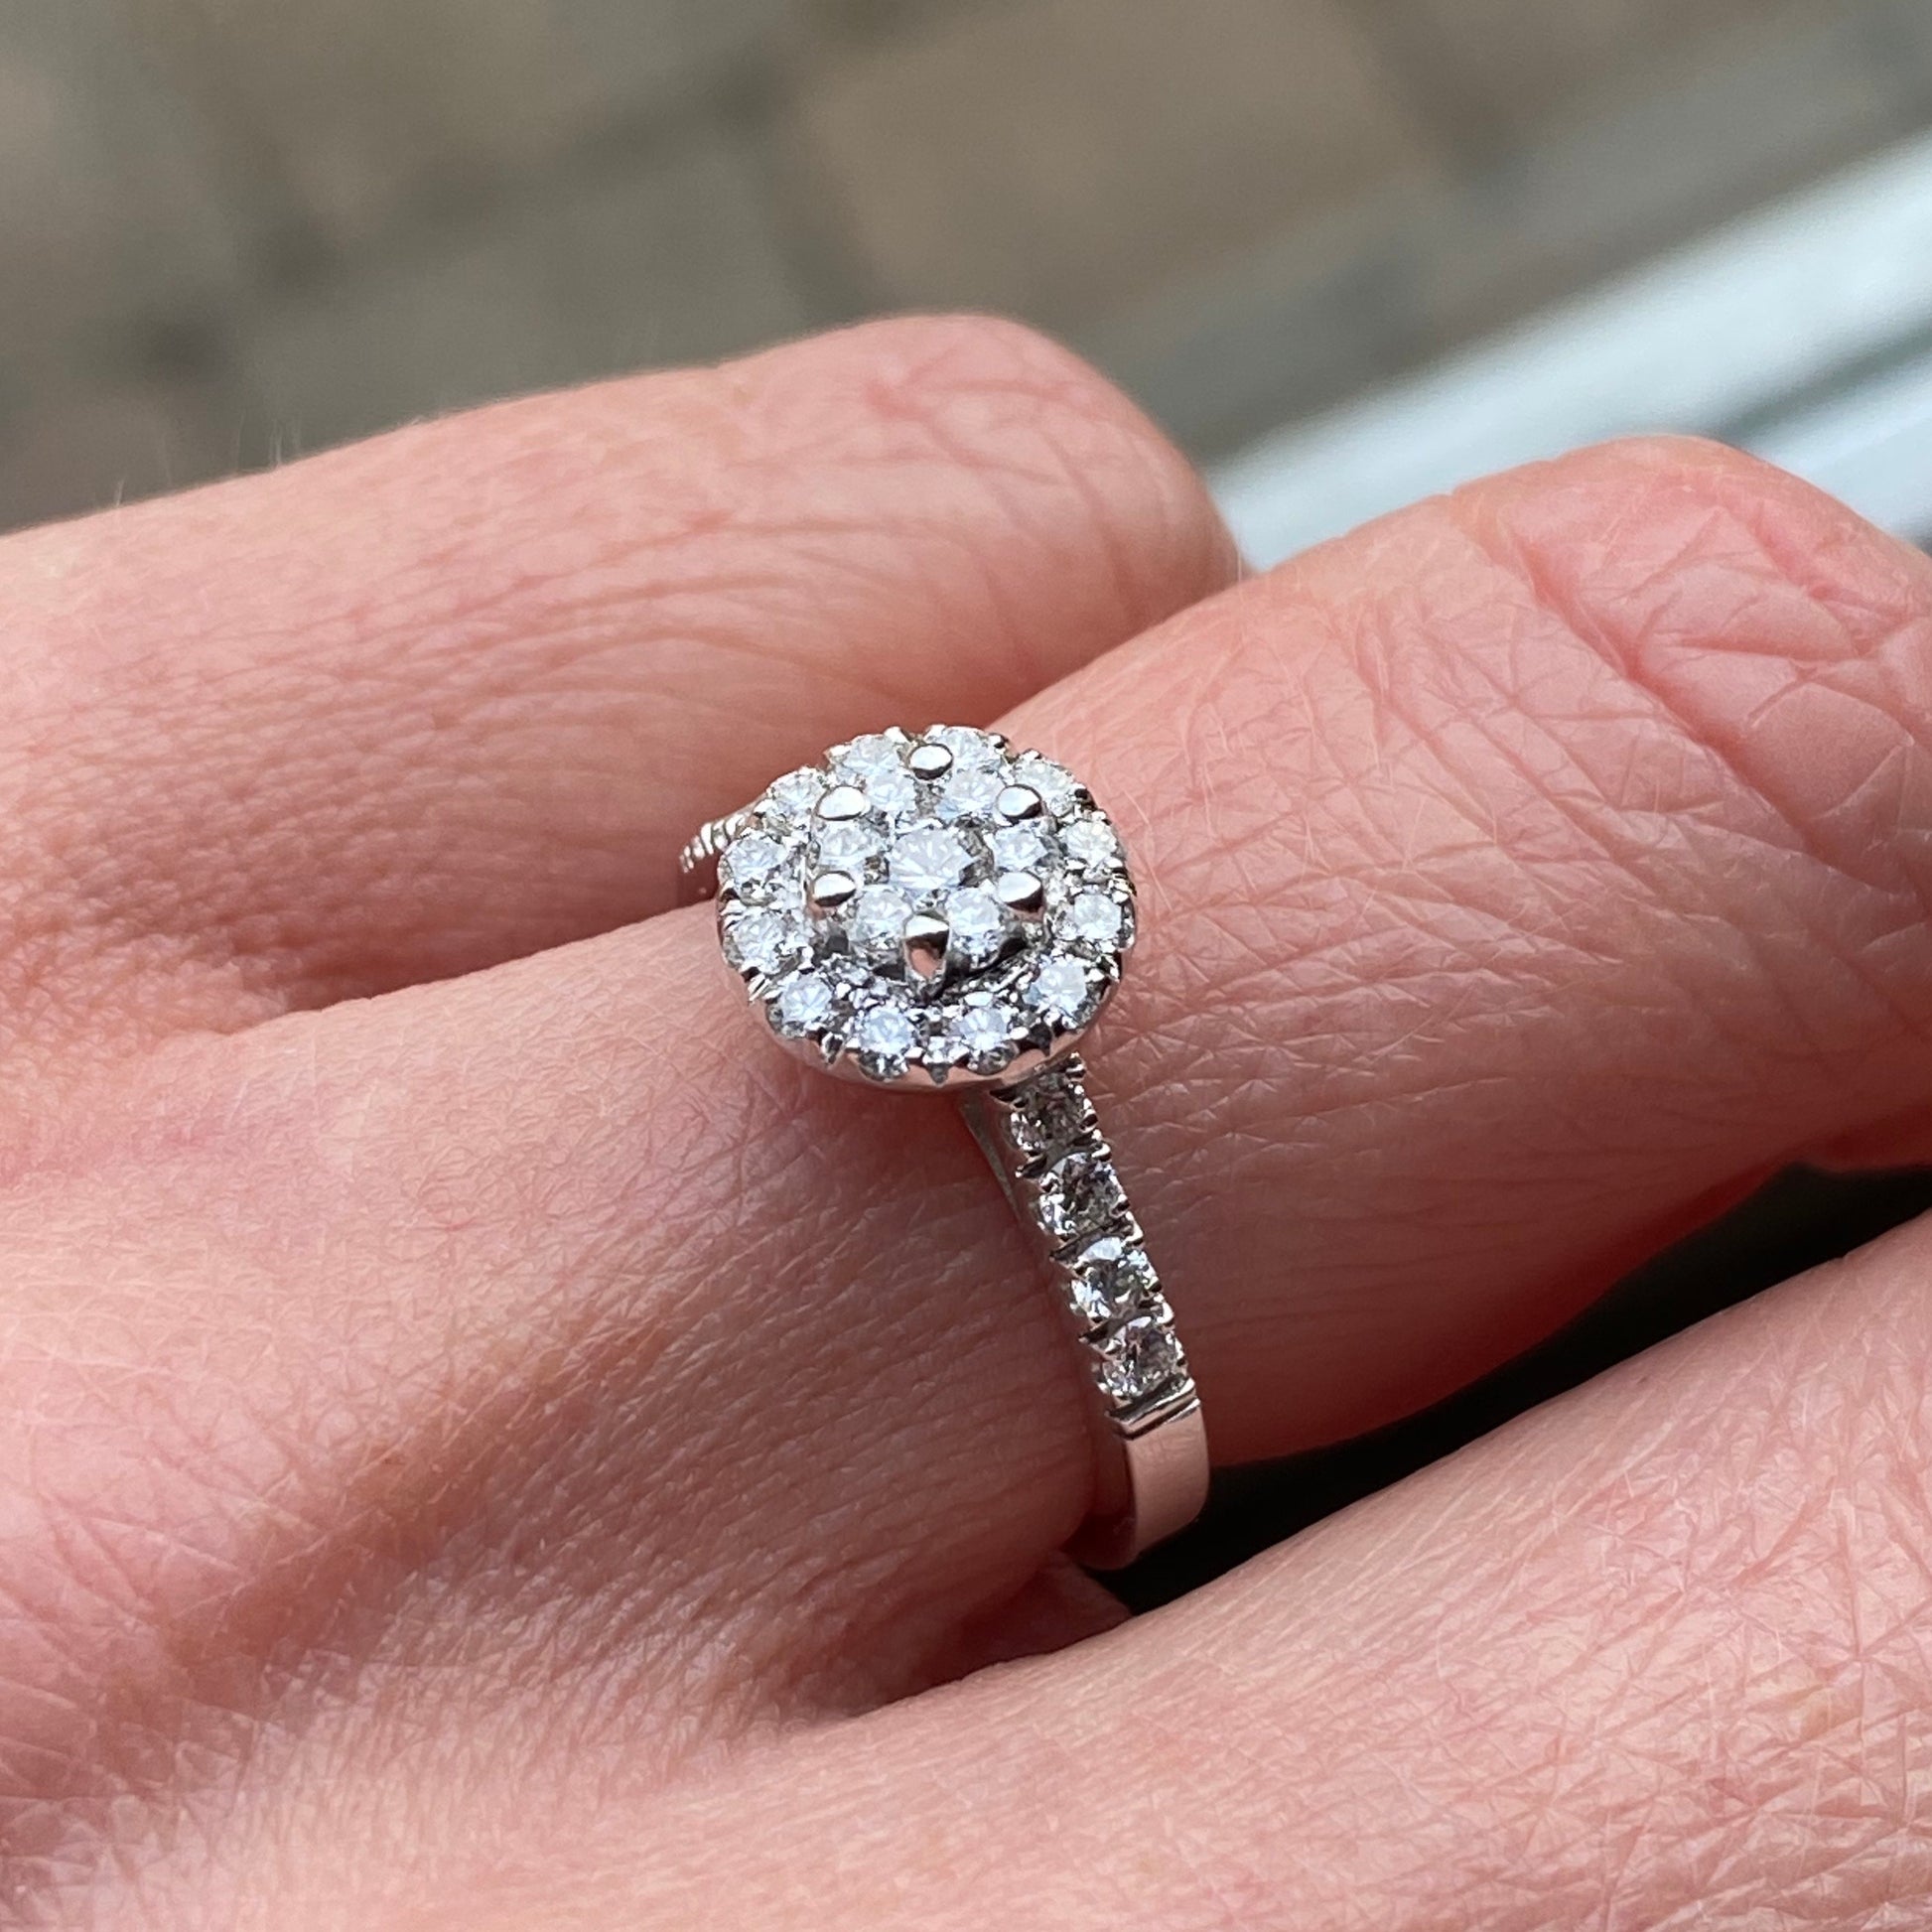 This round cluster diamond engagement ring  is a complete classic.  Its simplicity is so romantic. The Details... One 18ct white gold diamond engagement ring.  Diamond halo cluster with diamond-set shoulders. 0.66ct in total of round brilliant cut diamonds.  Colour GH.  Clarity SI. 18ct white gold, Pure White (tm) nickel-free.  Size N.